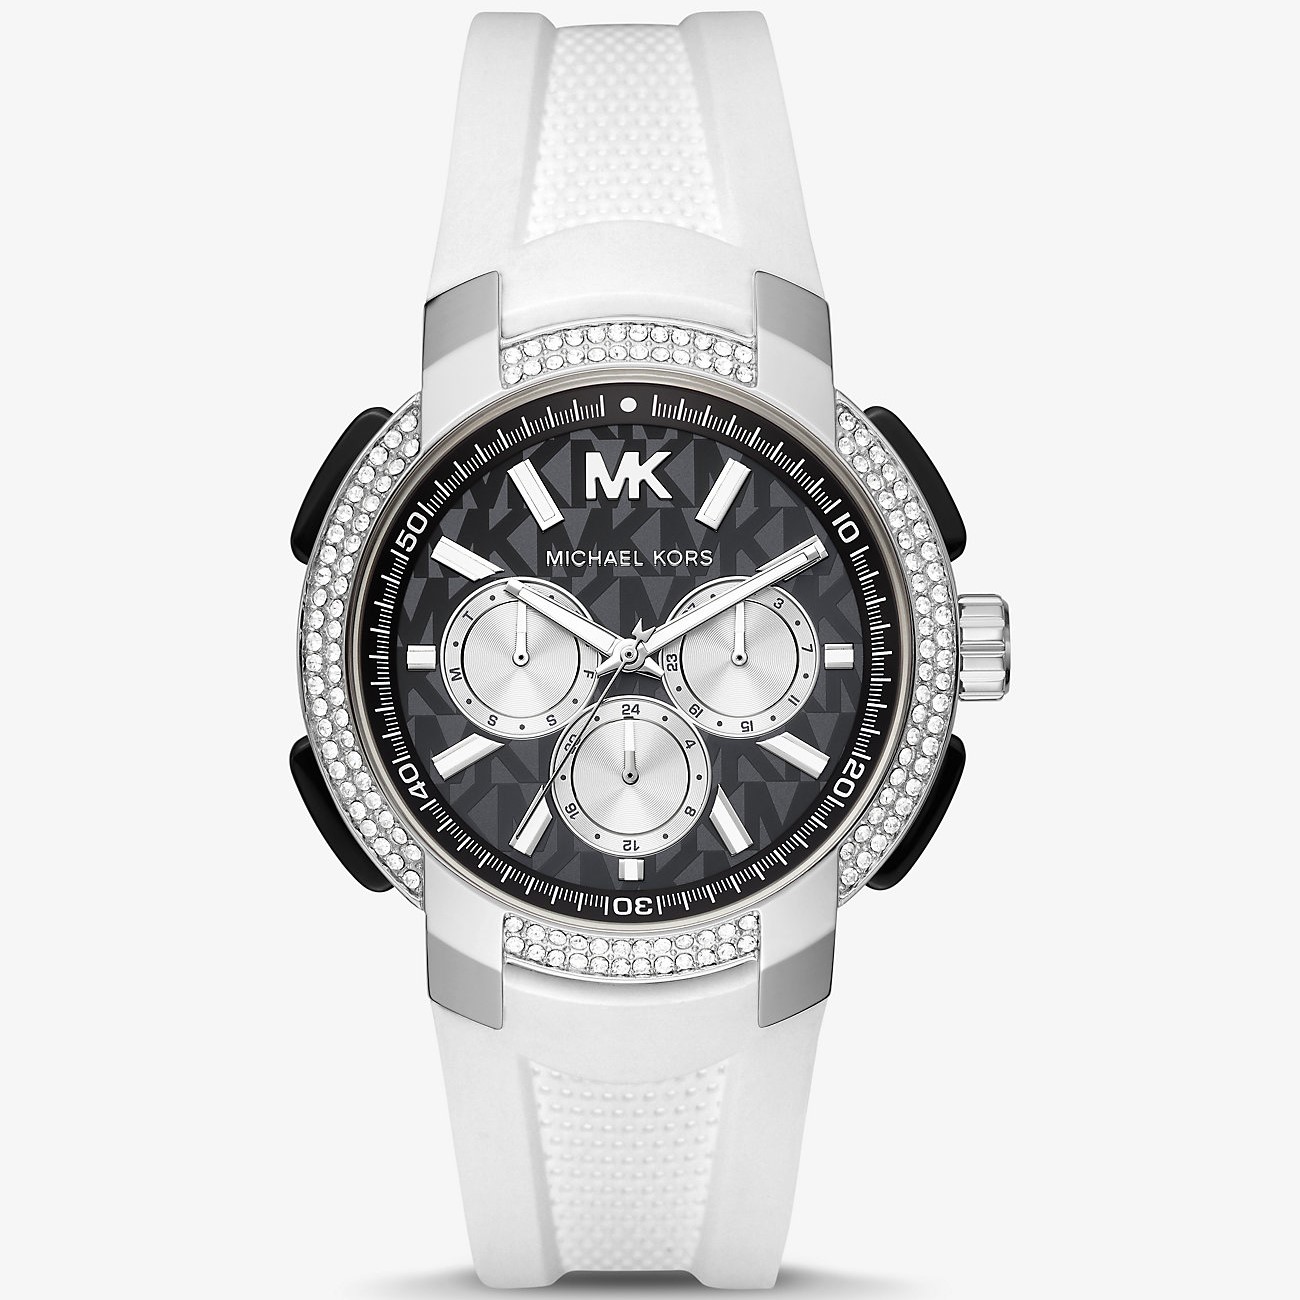 ĐỒNG HỒ MK NỮ MICHAEL KORS OVERSIZED PAVÉ SILVER-TONE AND SILICONE SPORT WATCH MK6947 2